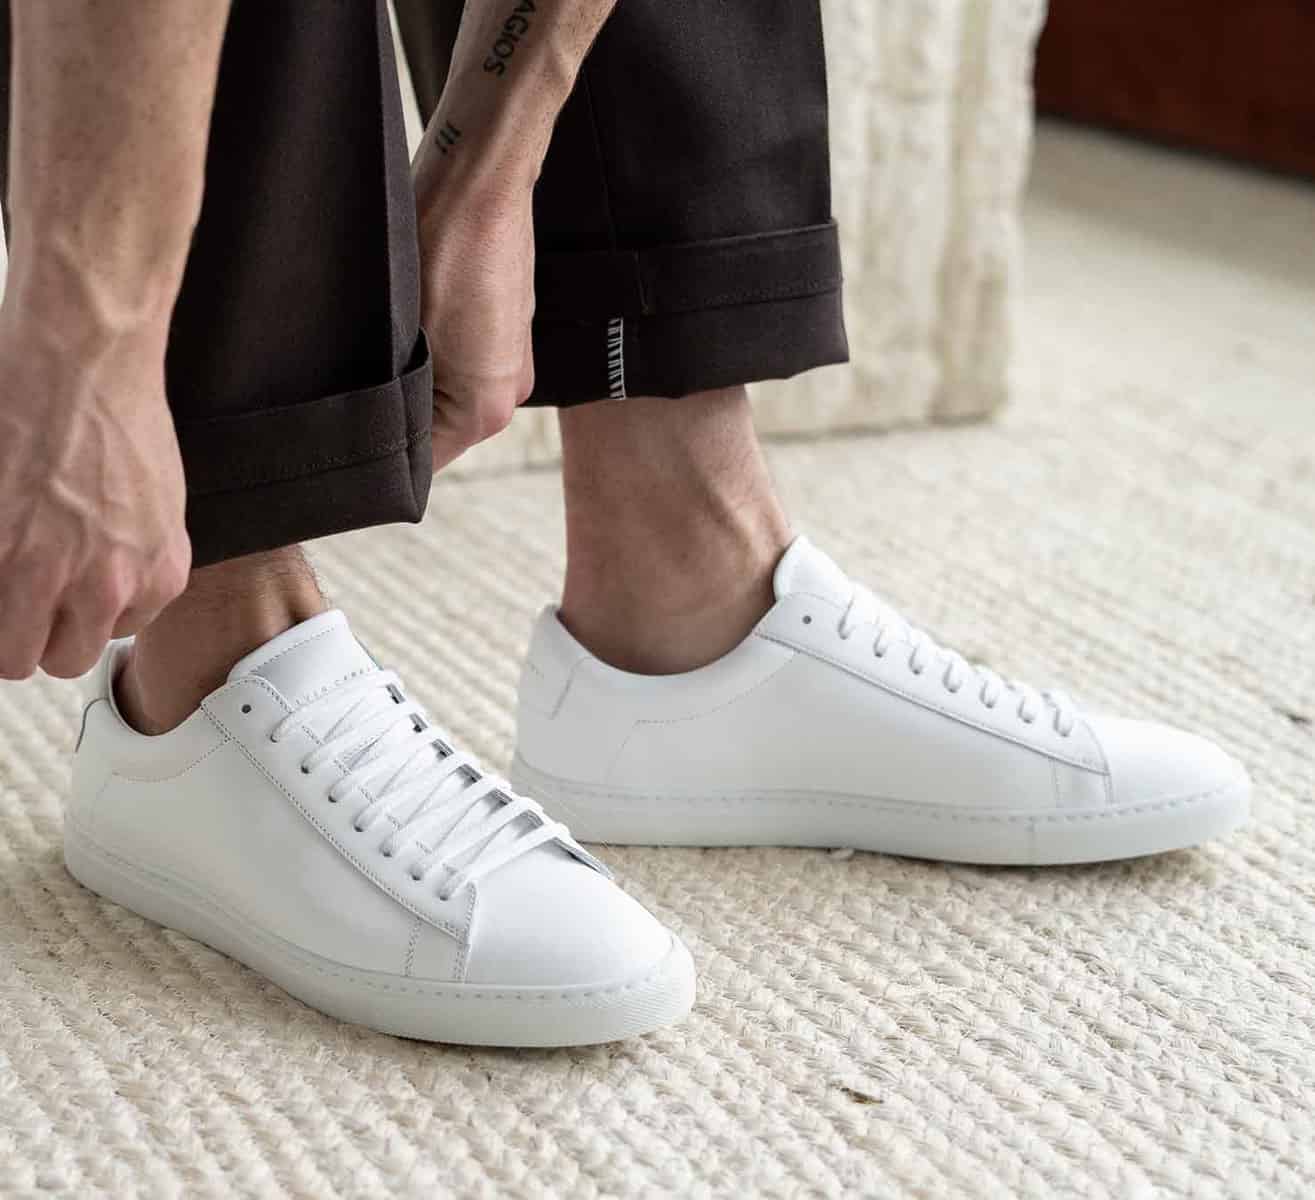 NICE ITALIAN STYLE MENS DRESS/CASUAL SHOES COLOR WHITE EXCELLENT QUALITY 